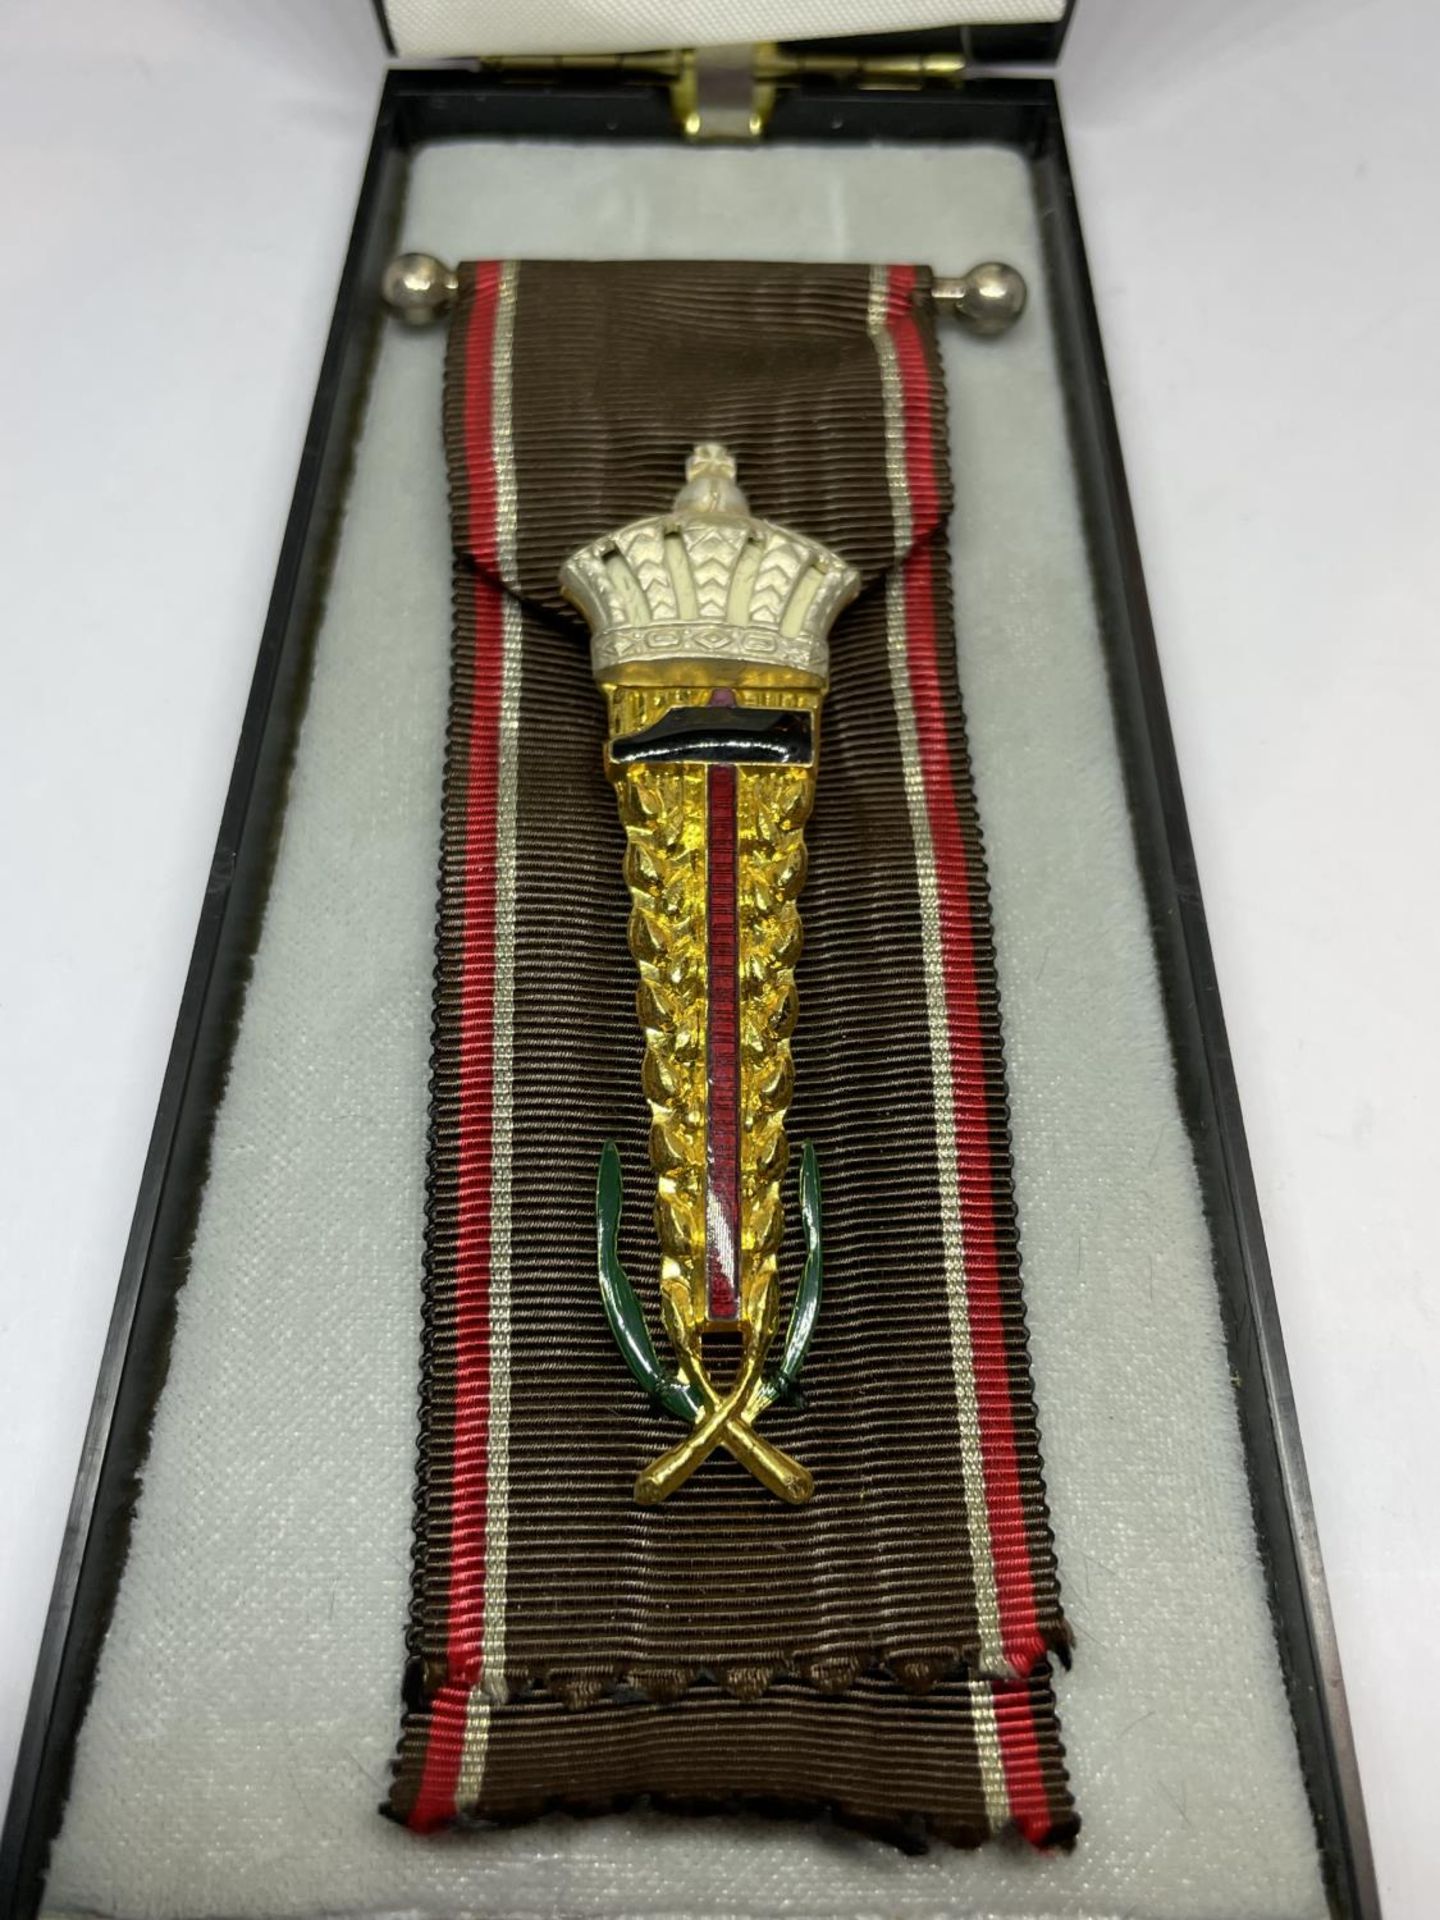 A MILITARY MEDAL IN A PRESENTATION BOX - Image 2 of 3